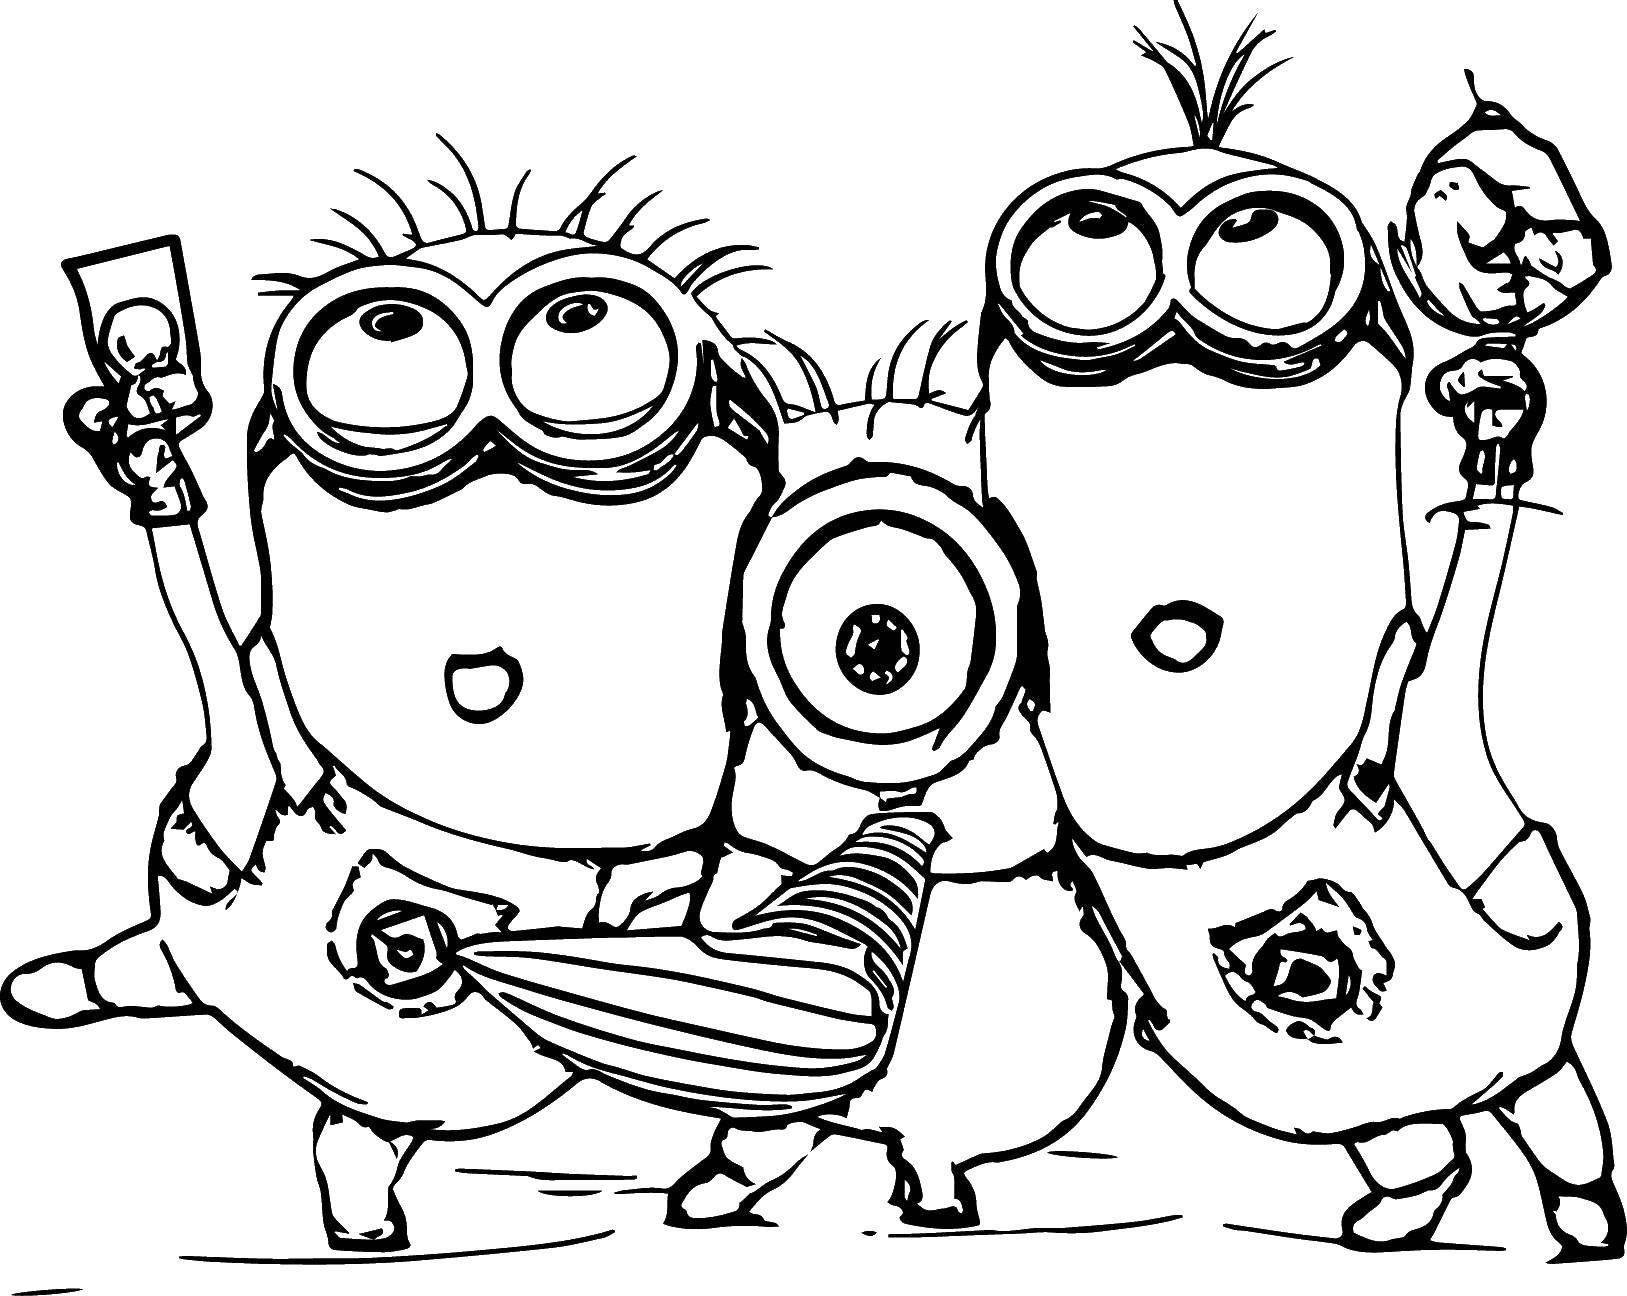 Coloring Minions. Category the minions. Tags:  Cartoon character, Minion.